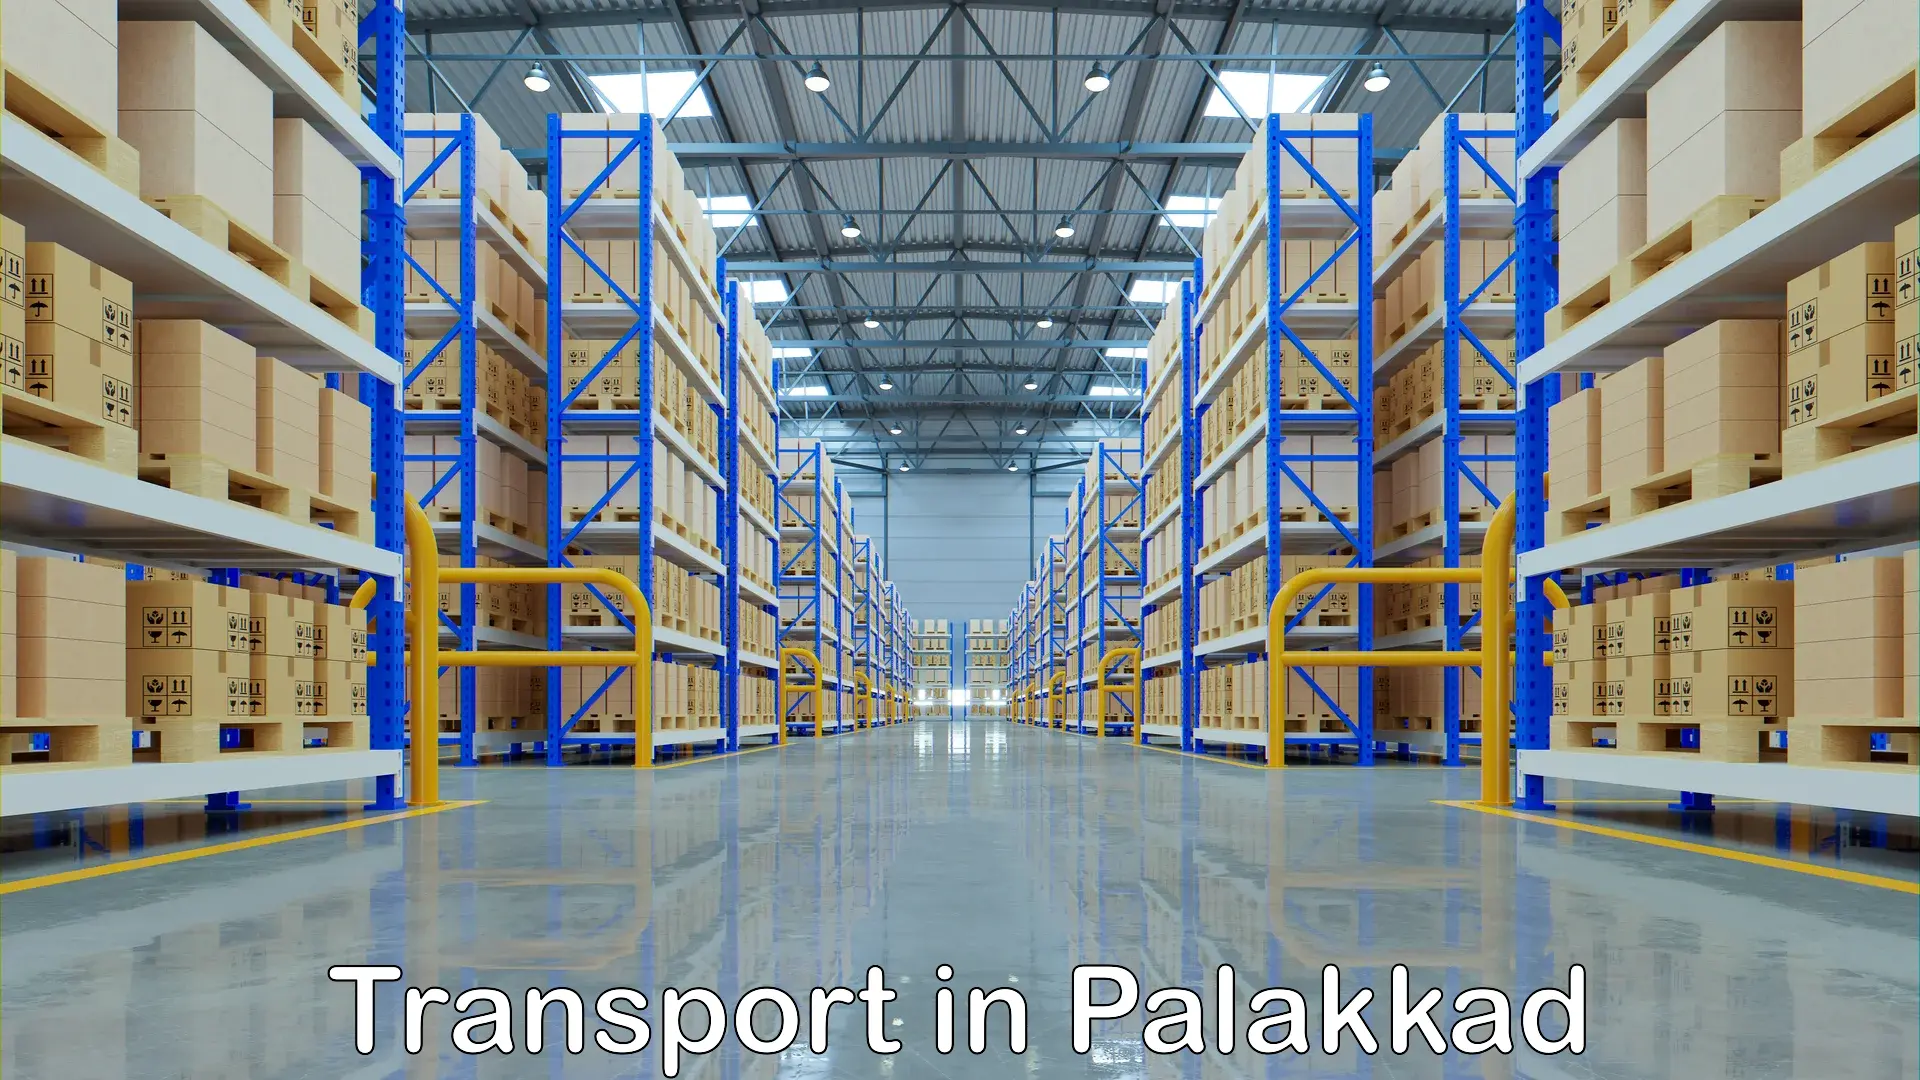 Daily transport service in Palakkad